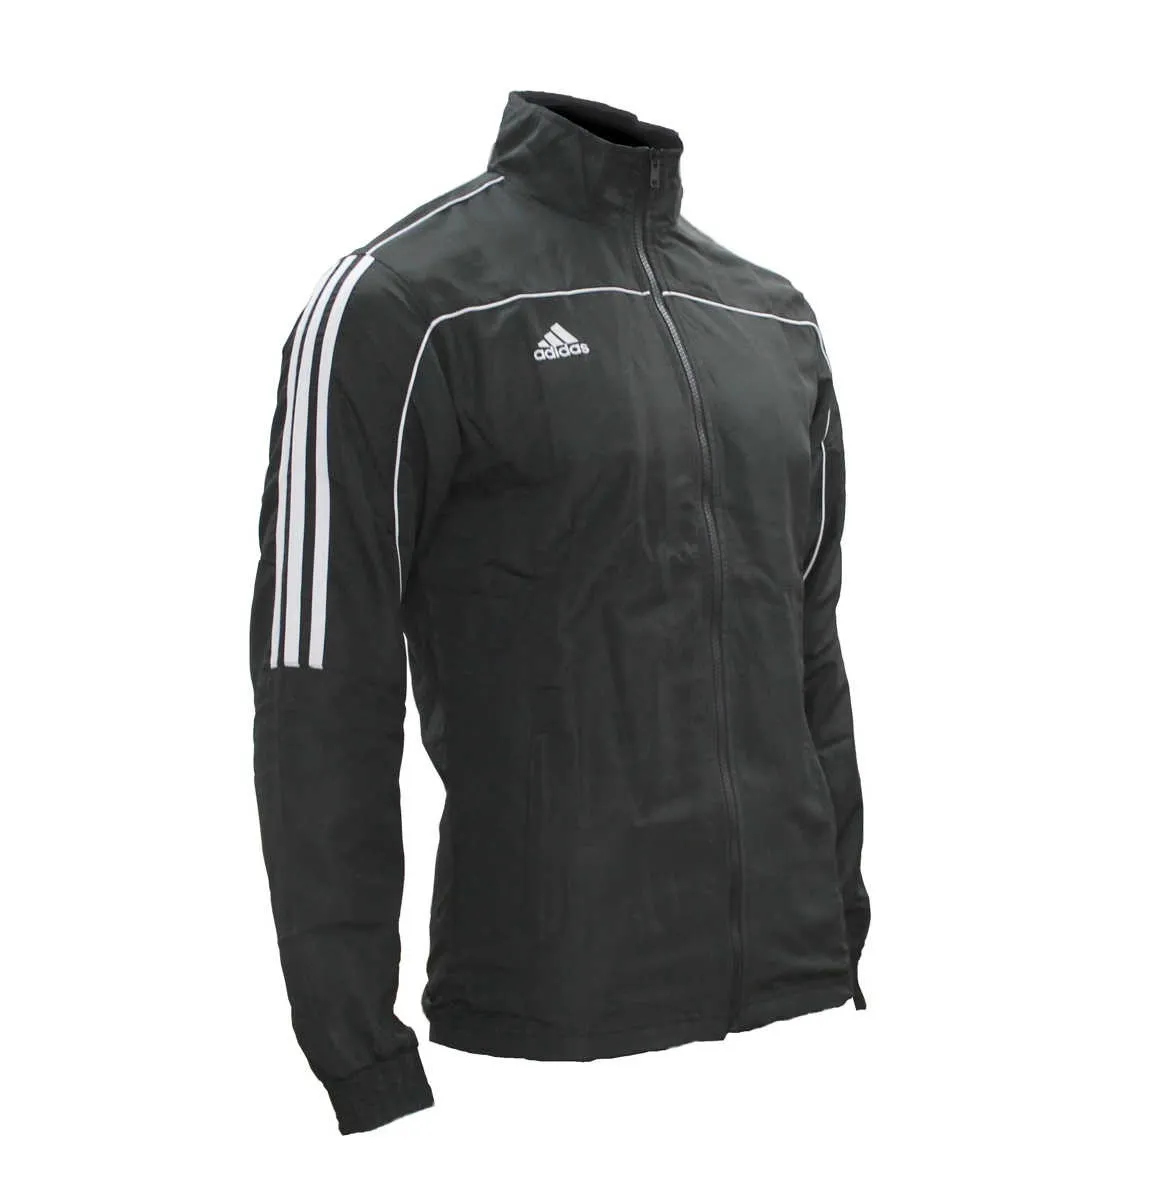 adidas track-suit top